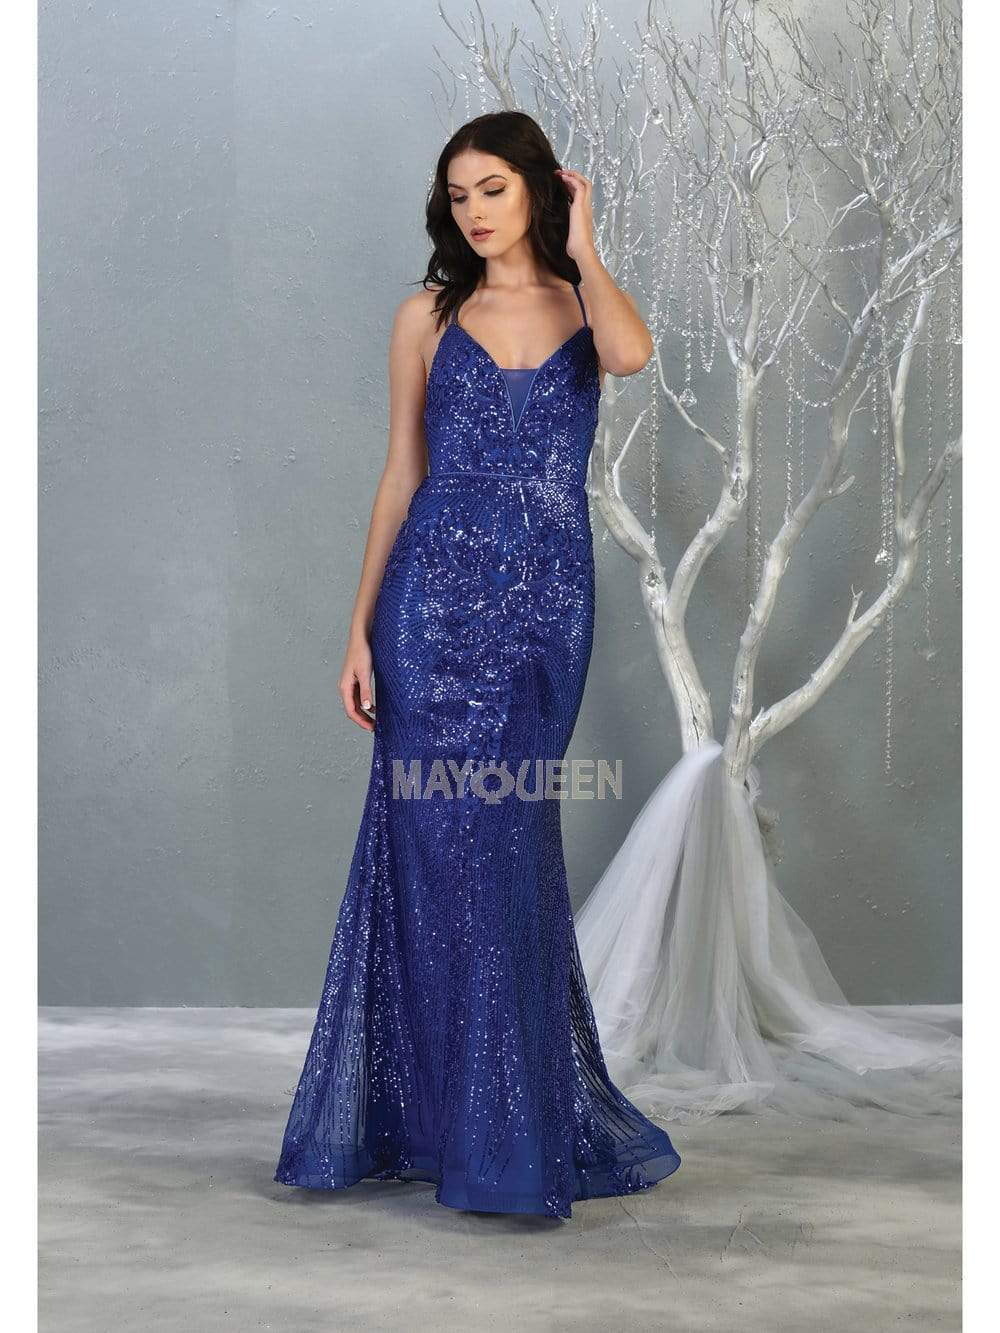 May Queen - RQ7878 Strappy Sequined Trumpet Dress Evening Dresses 2 / Royal